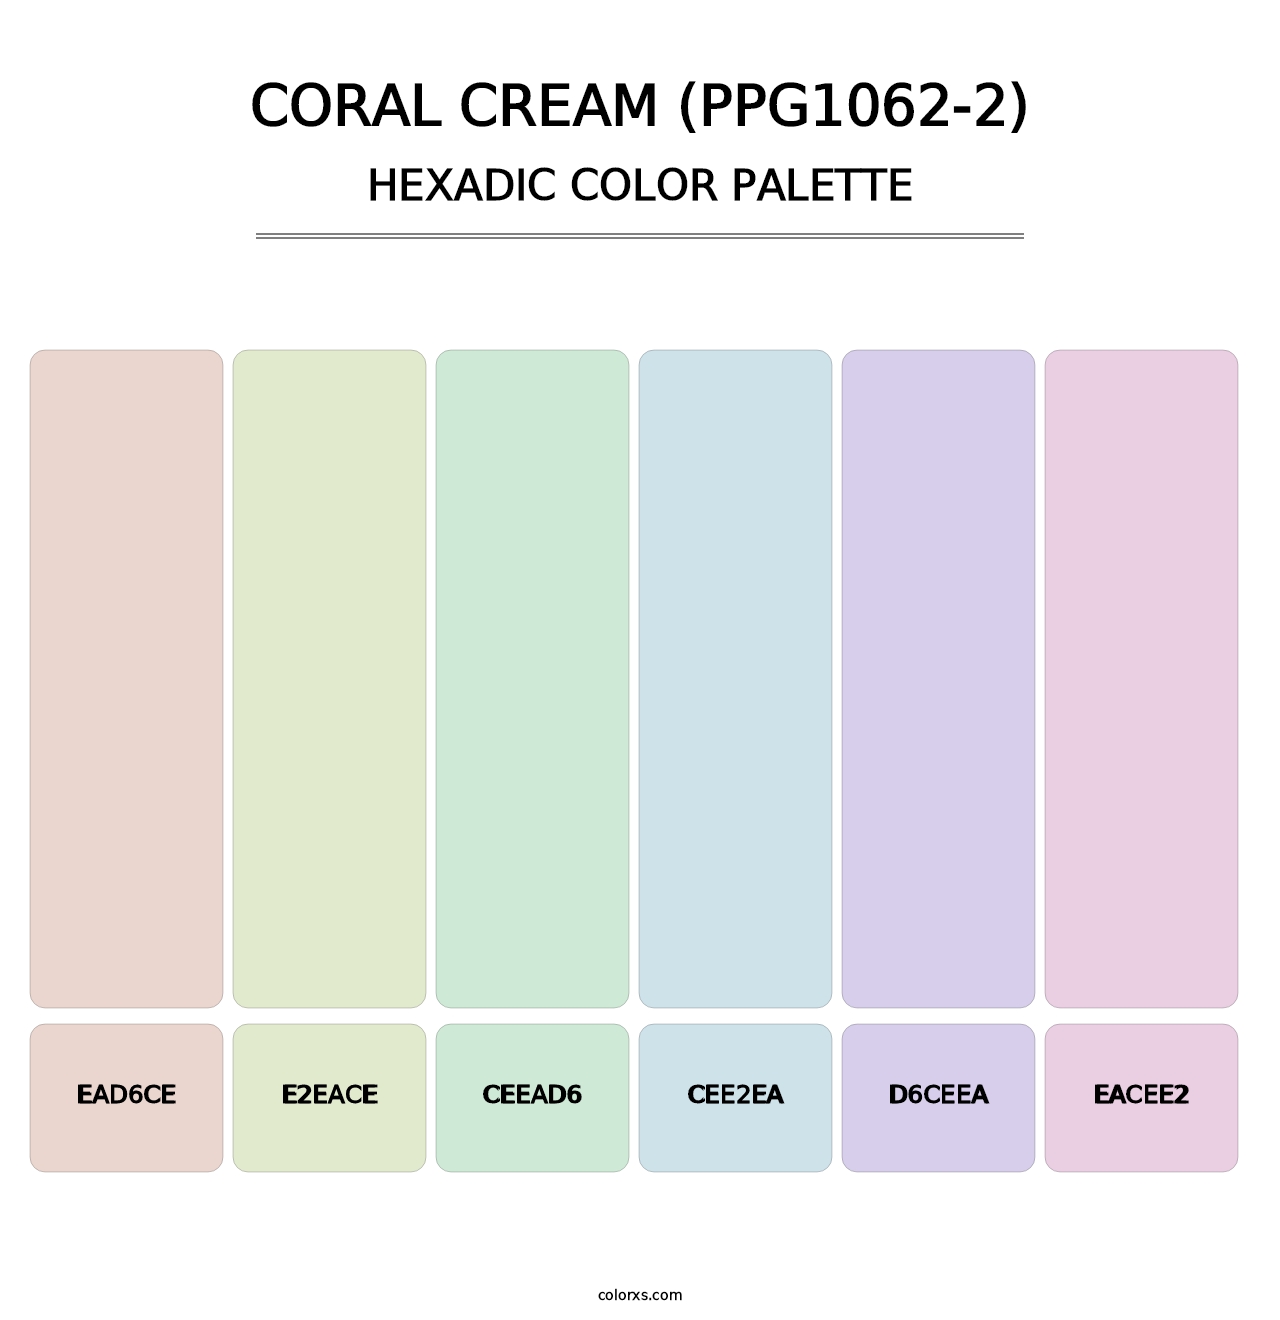 Coral Cream (PPG1062-2) - Hexadic Color Palette